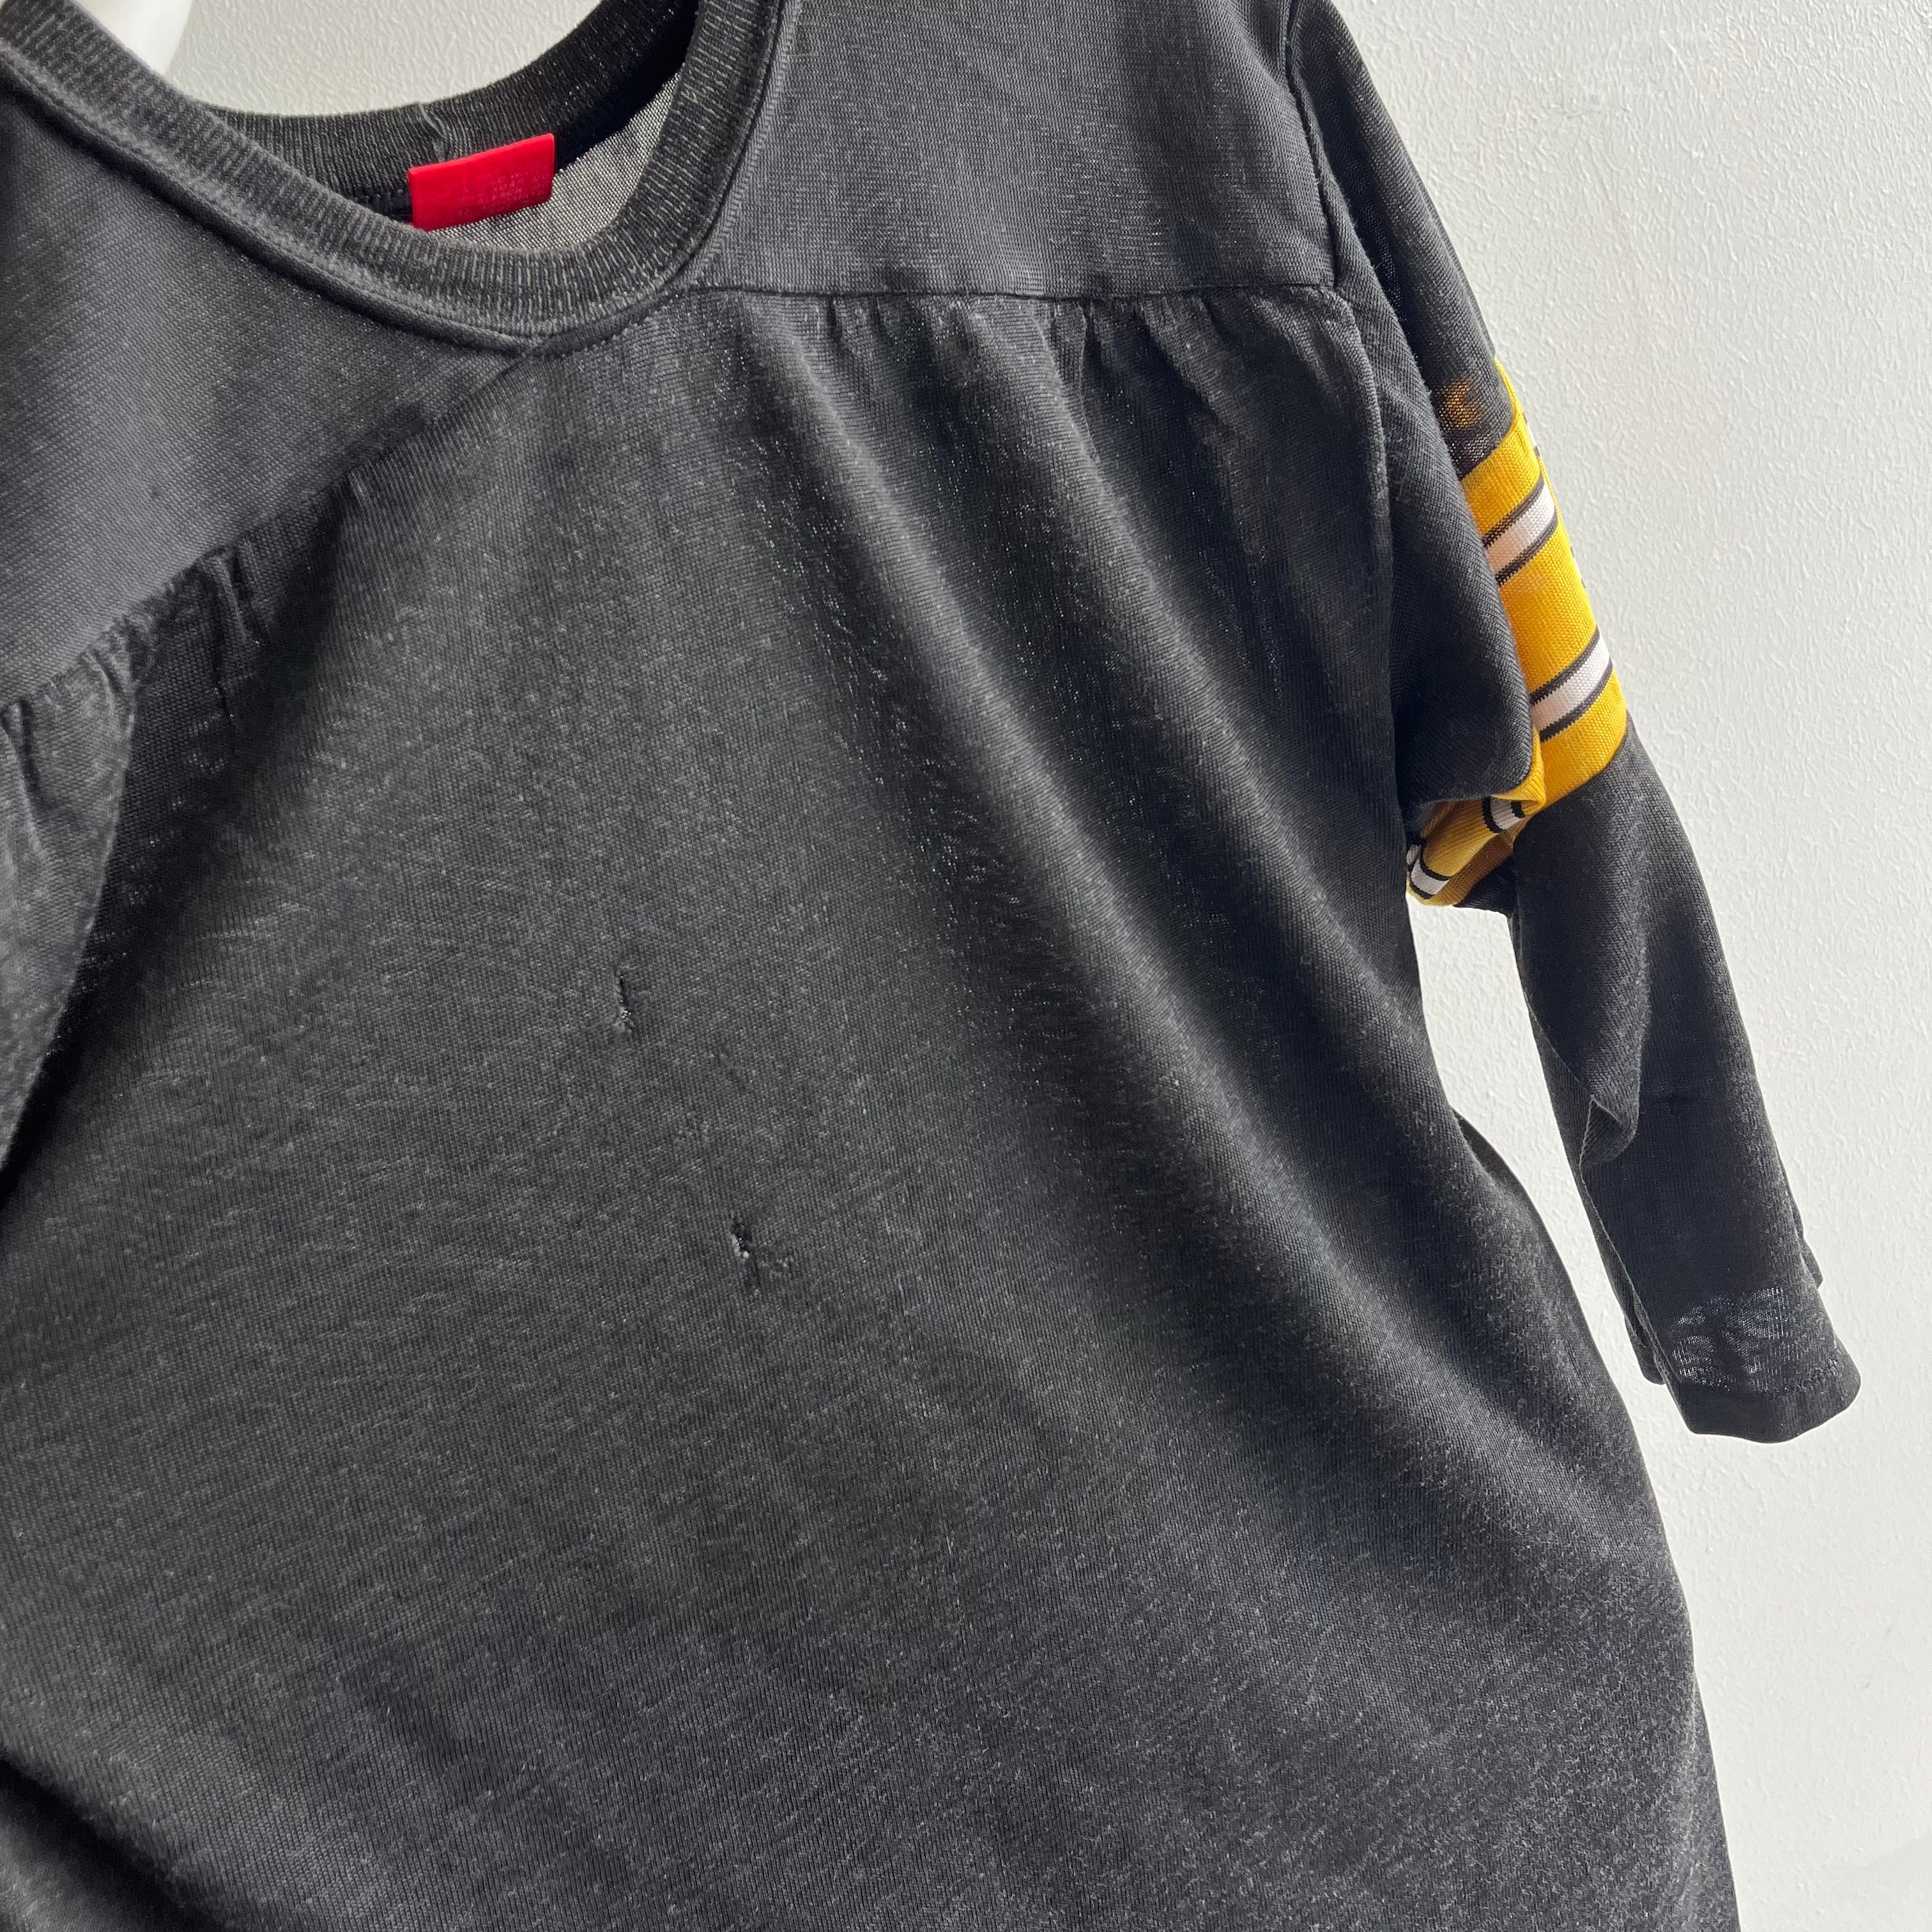 1970s Football Shirt by Rawlings - Youth Large